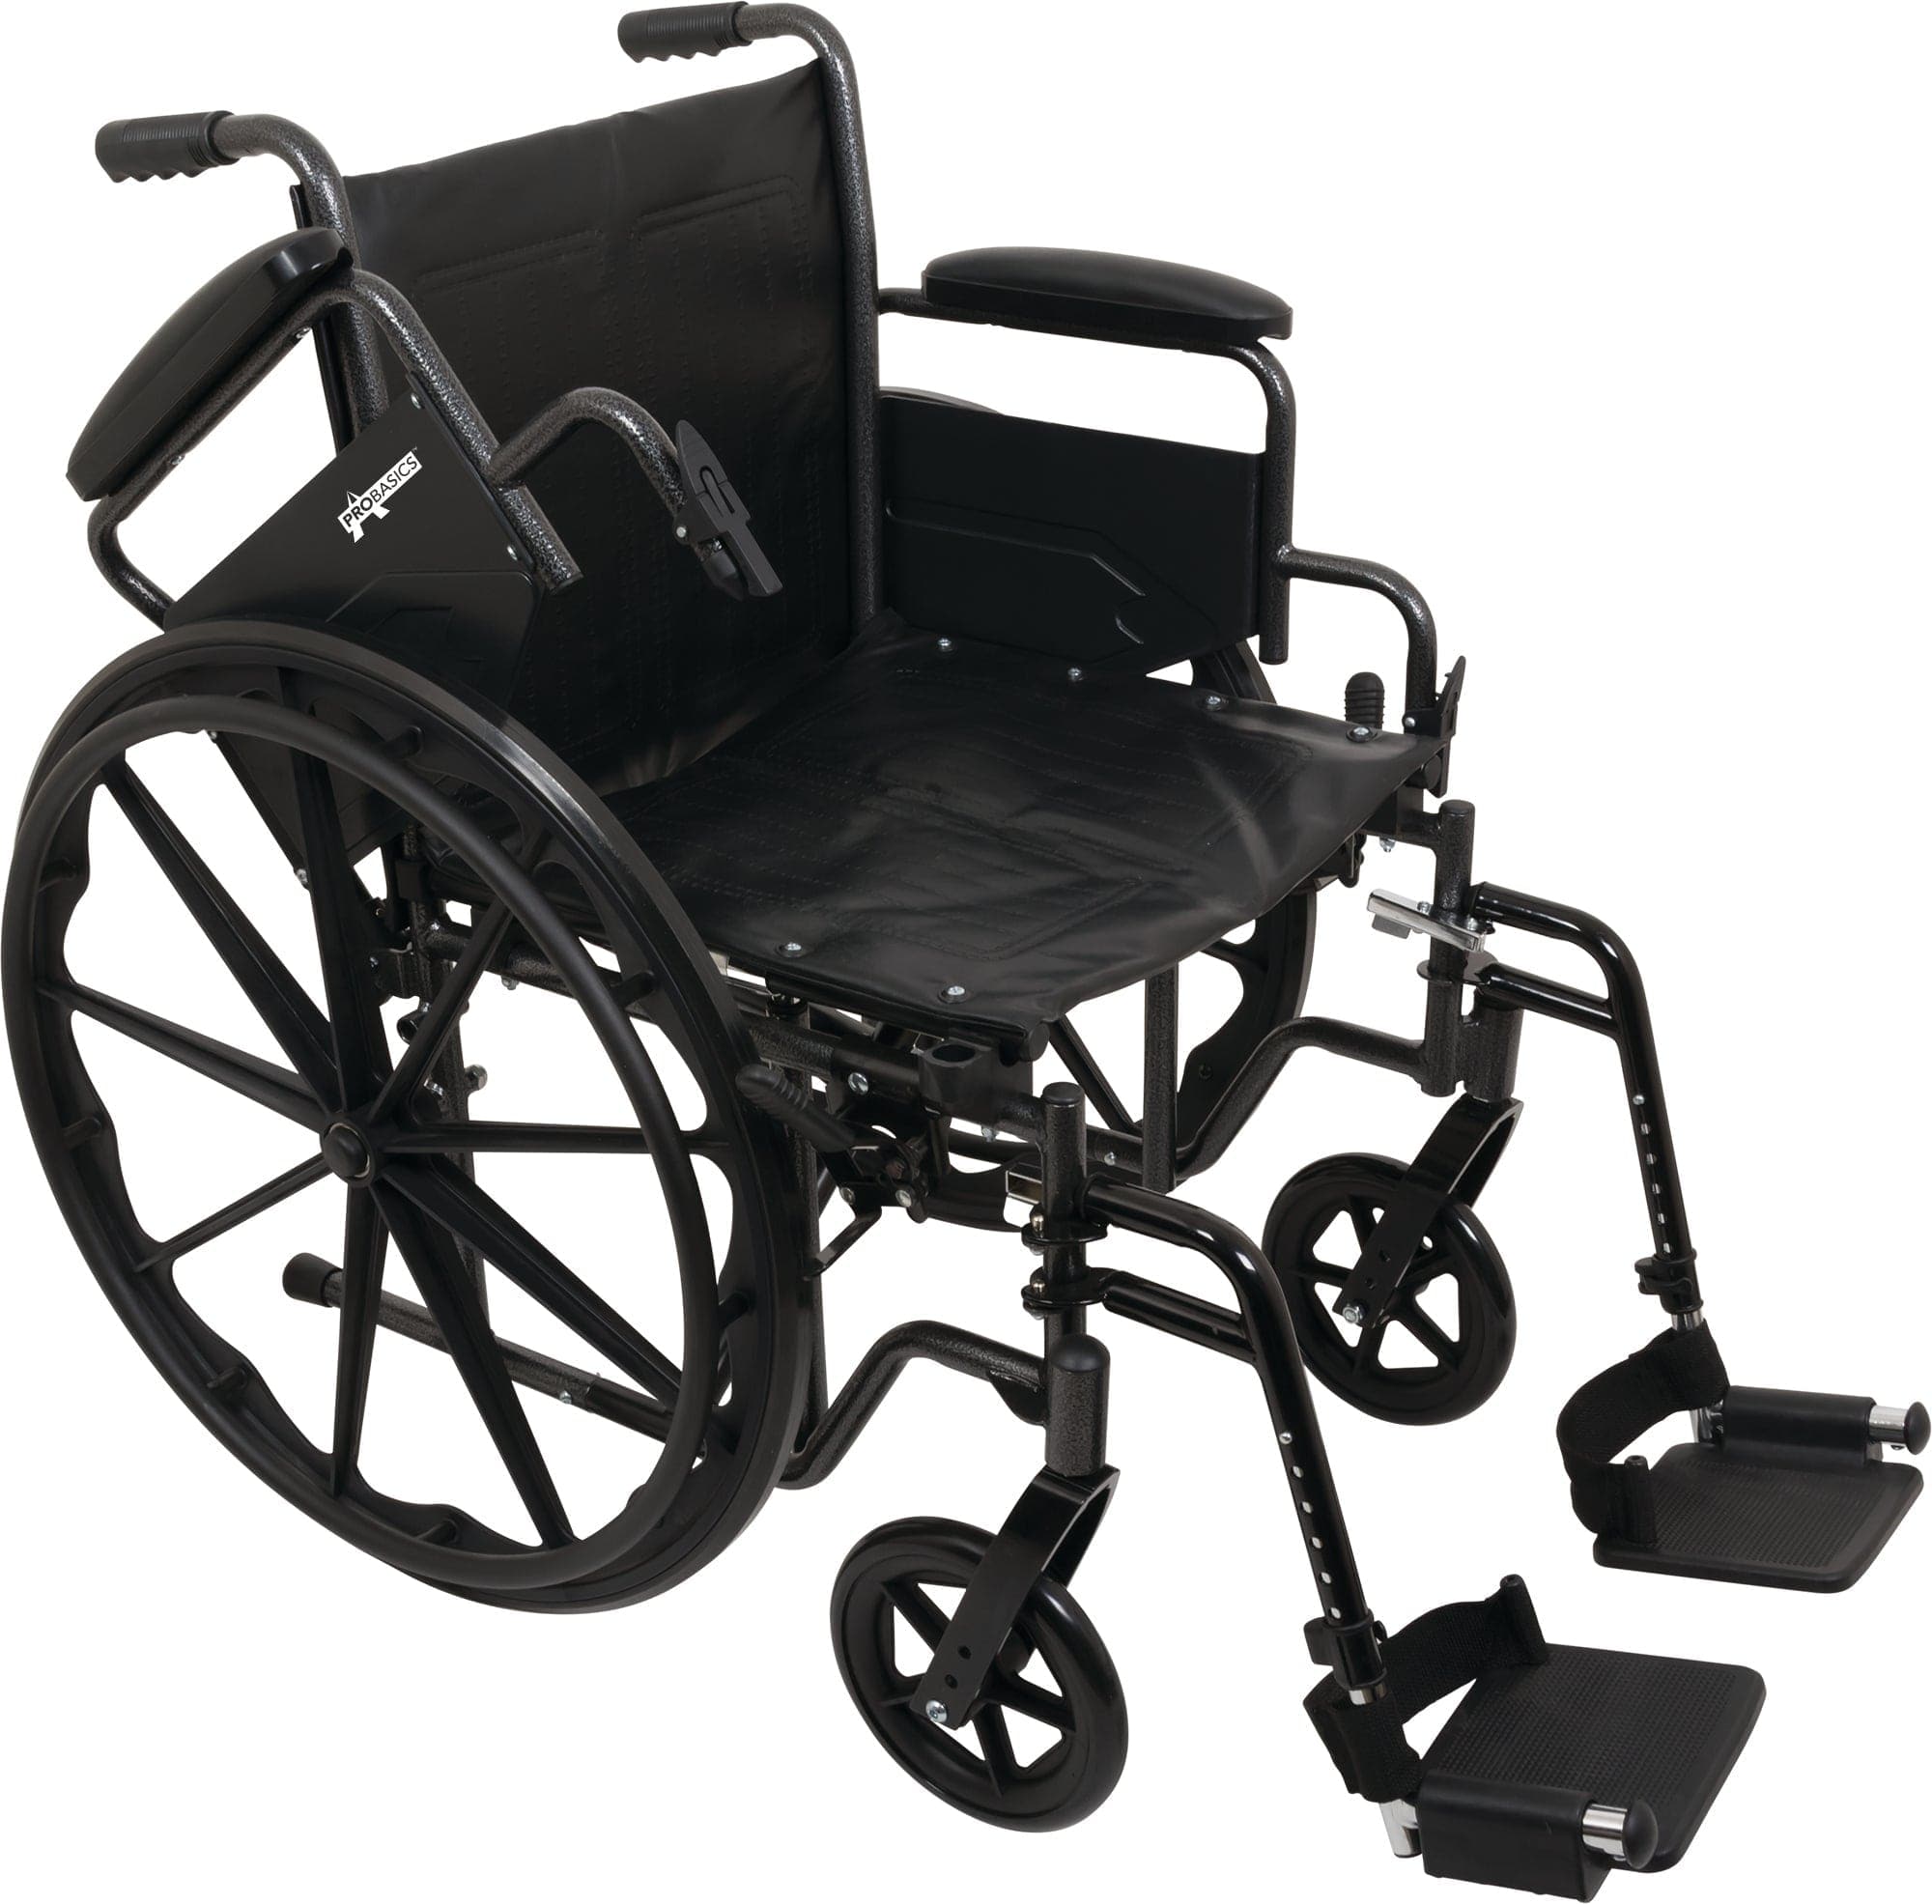 Compass Health Compass Health ProBasics K2 Wheelchair with 18" x 16" Seat and Elevating Legrests WC21816DE